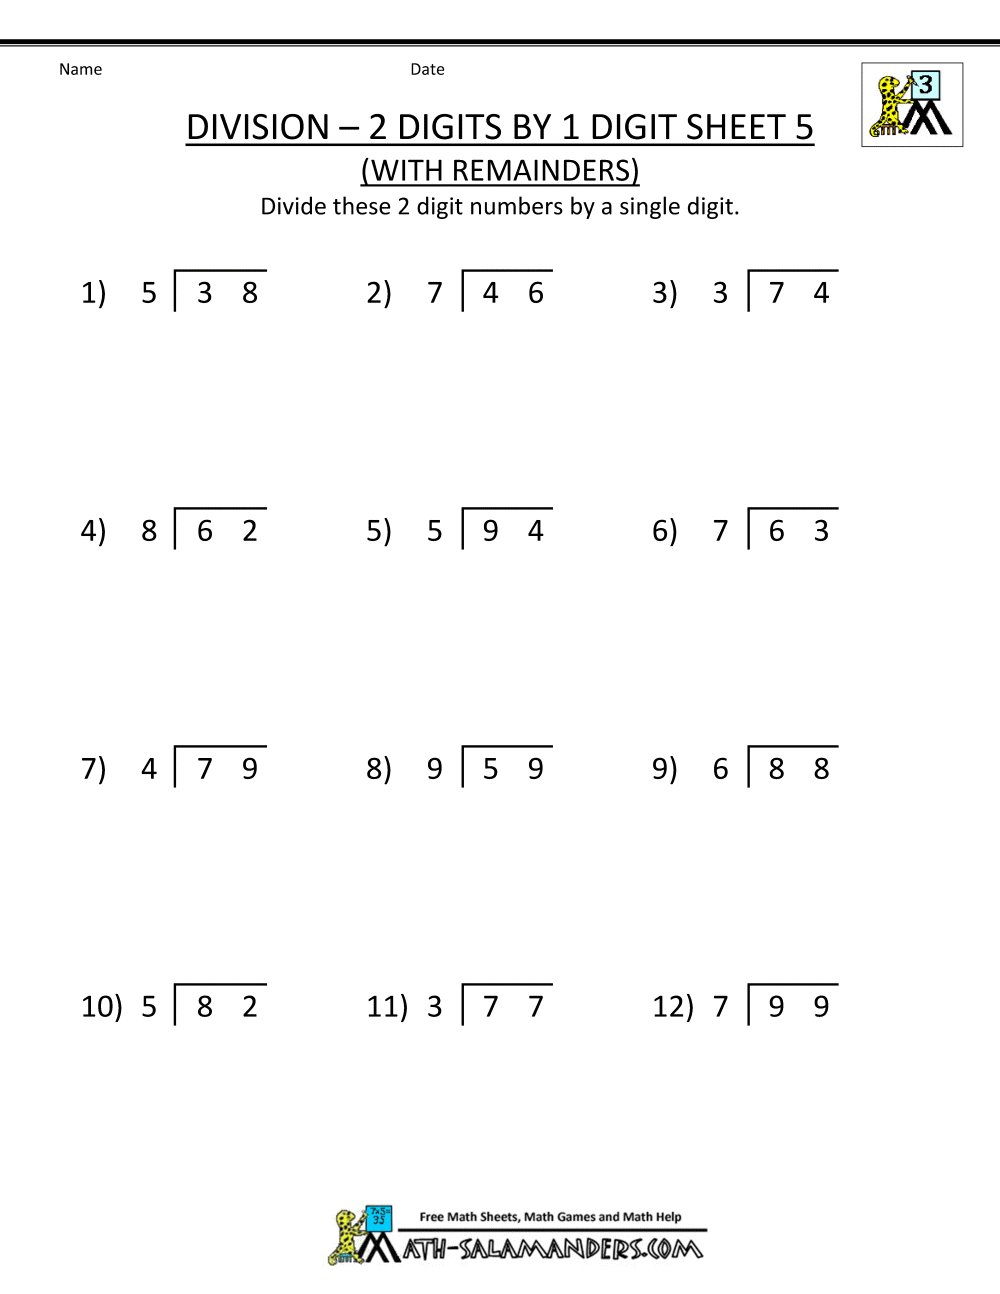 Division Questions For Grade 3